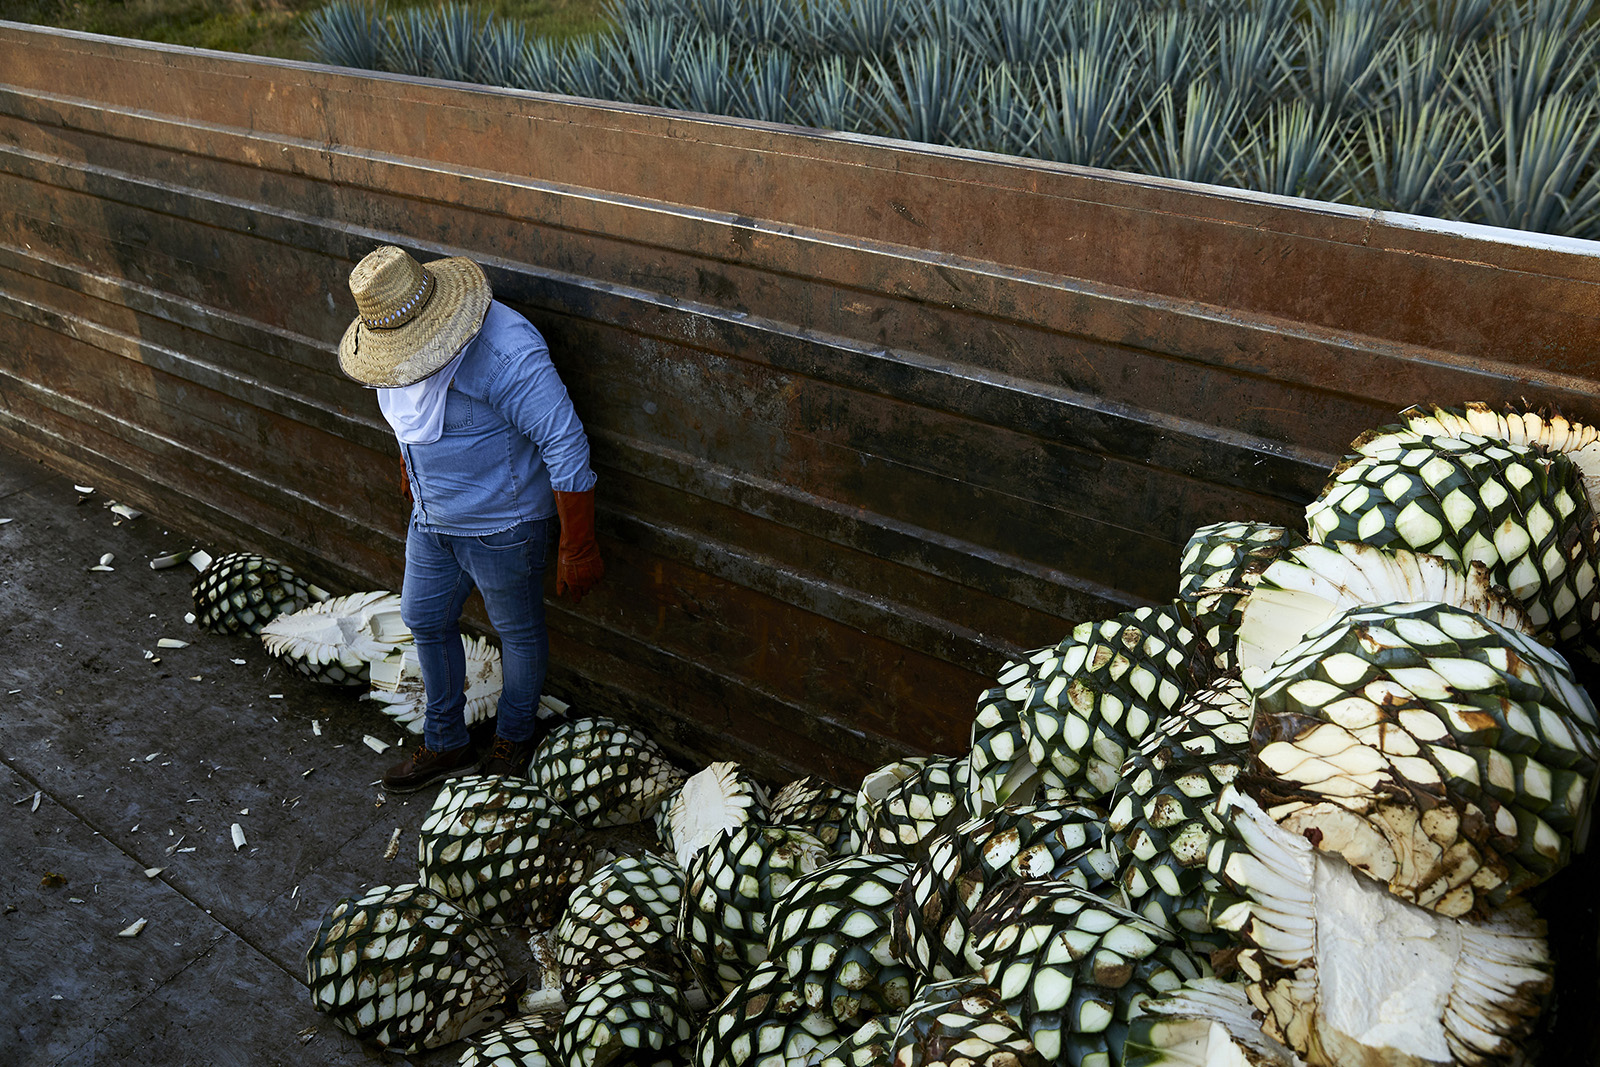 Documented the tequila making process in Jalisco, Mexico and helped build brand recognition with an emerging boutique tequila by traveling through Mexico and capturing different aspects of “taking it slow”